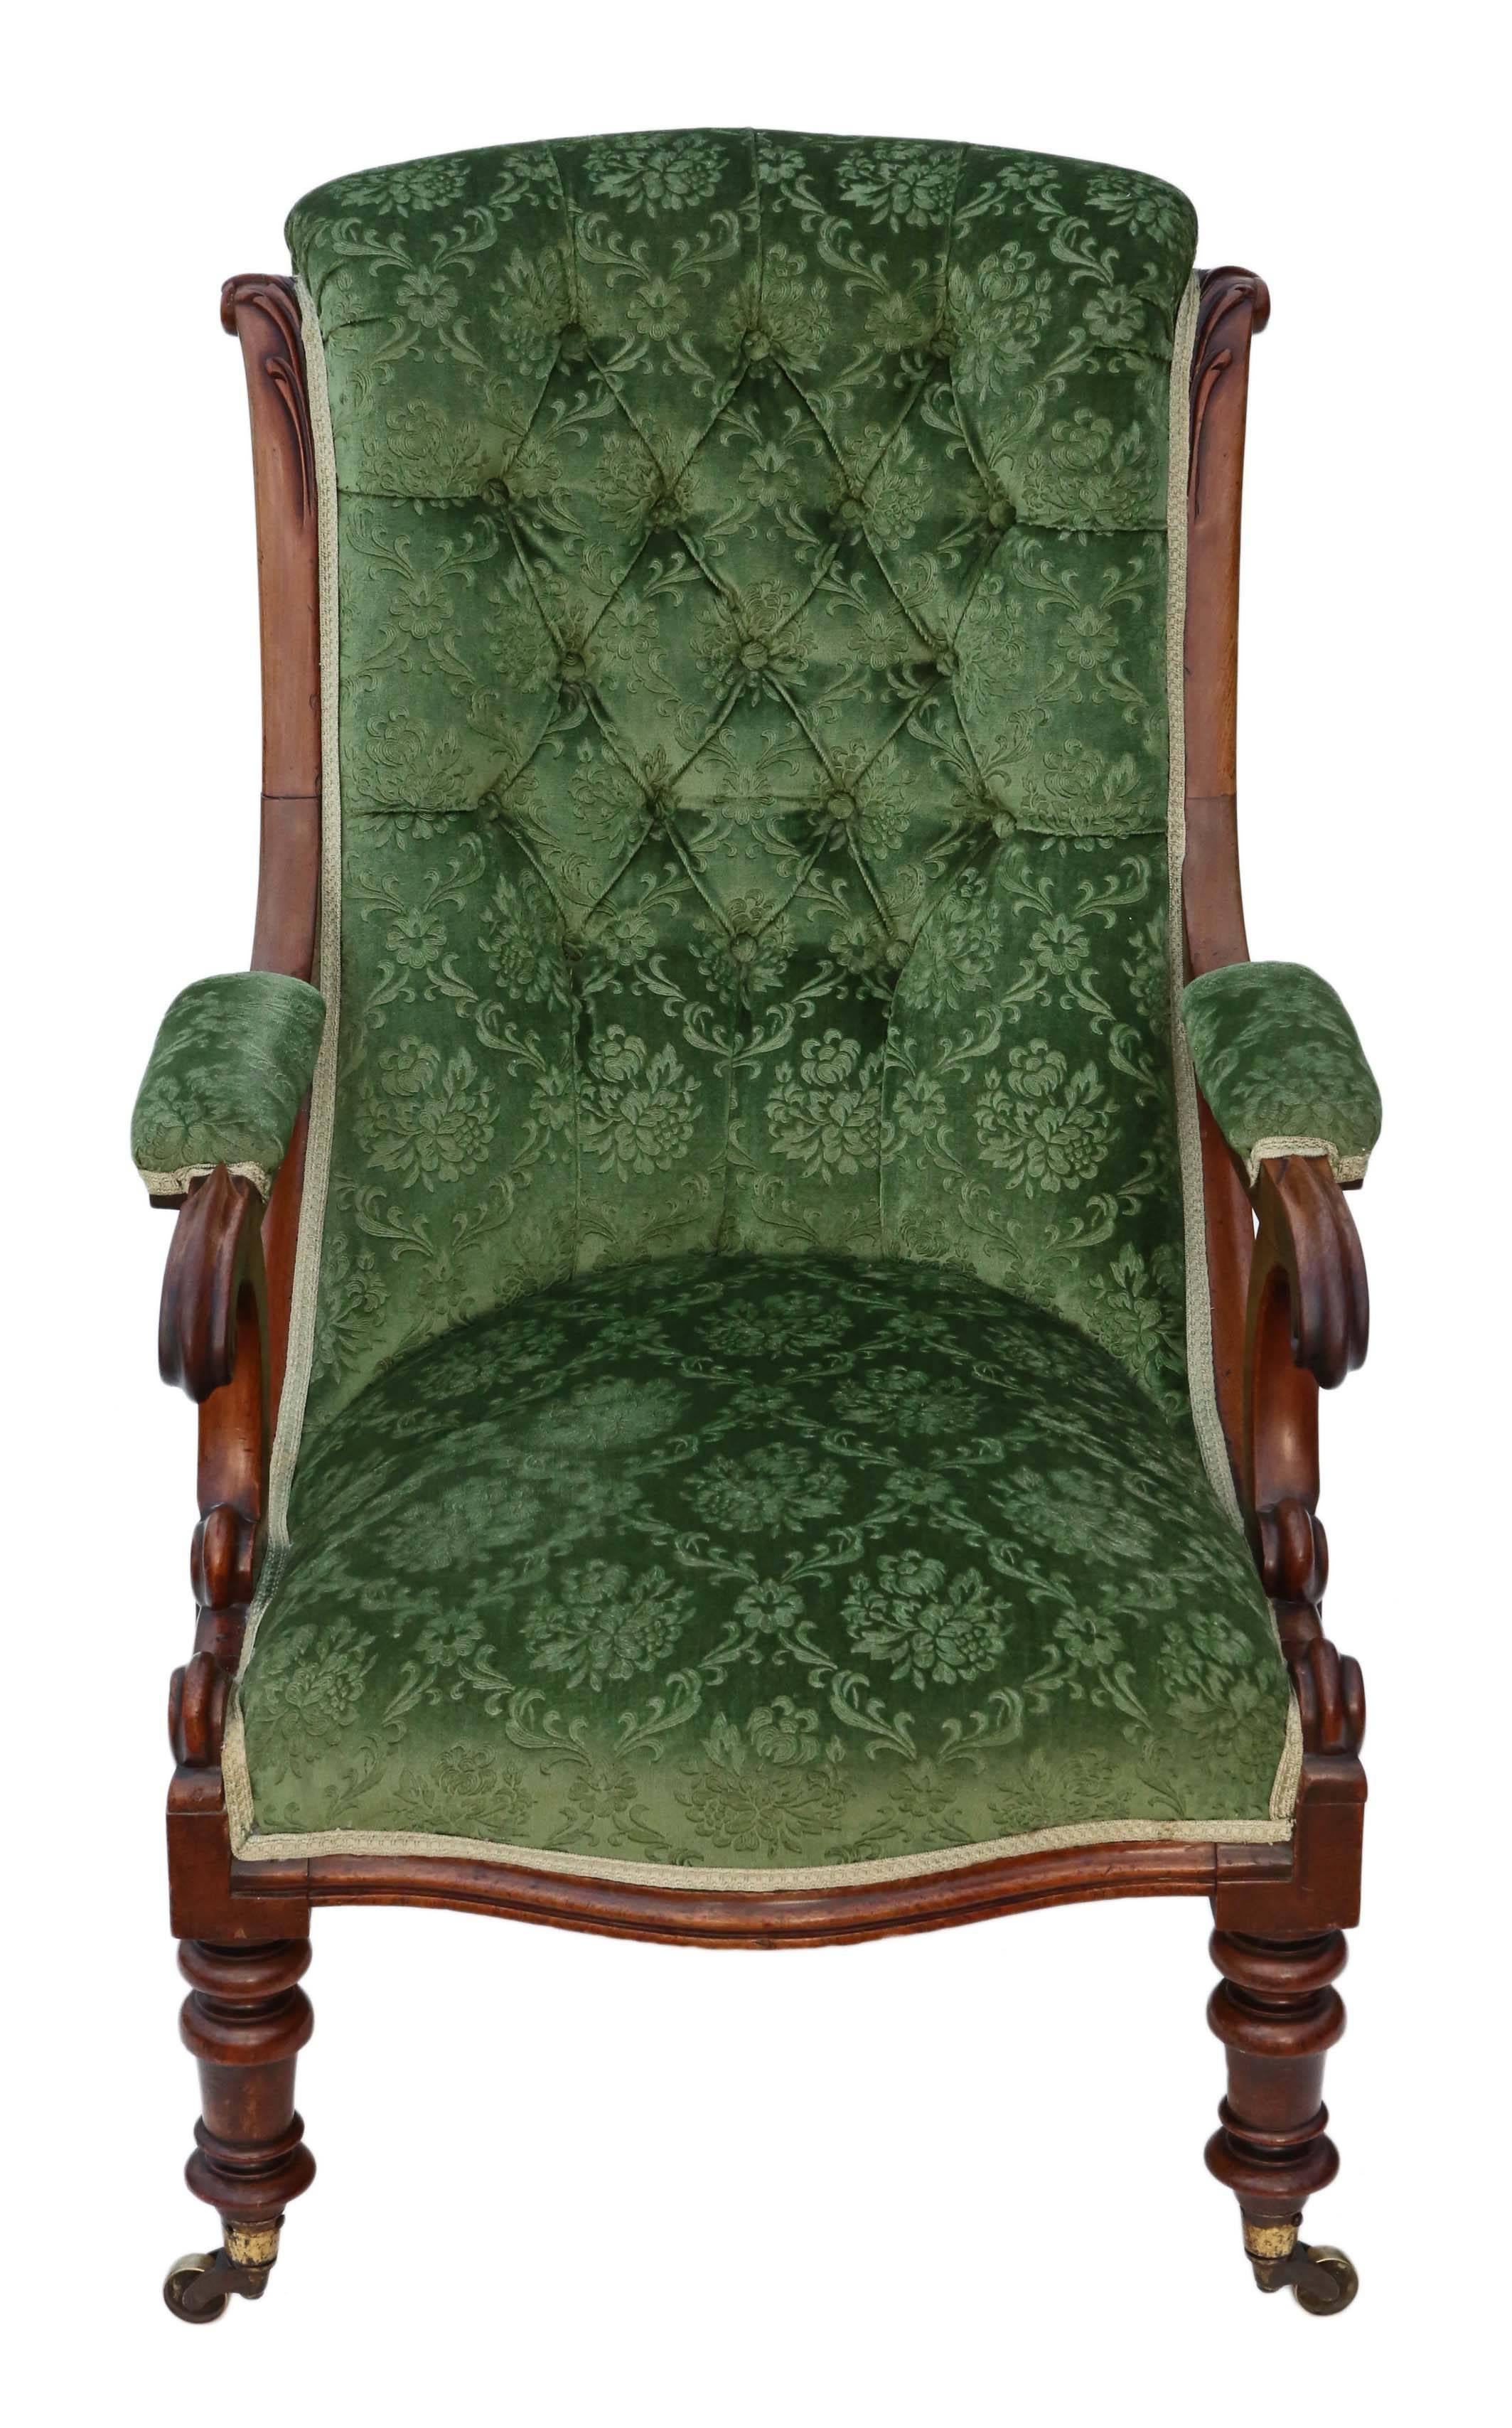 Antique quality William IV, circa 1830-1840 mahogany library armchair.

Solid, no loose joints and no woodworm. Full of age, character and charm. A very decorative chair. The quality leaf green velour button back upholstery is not new, but has